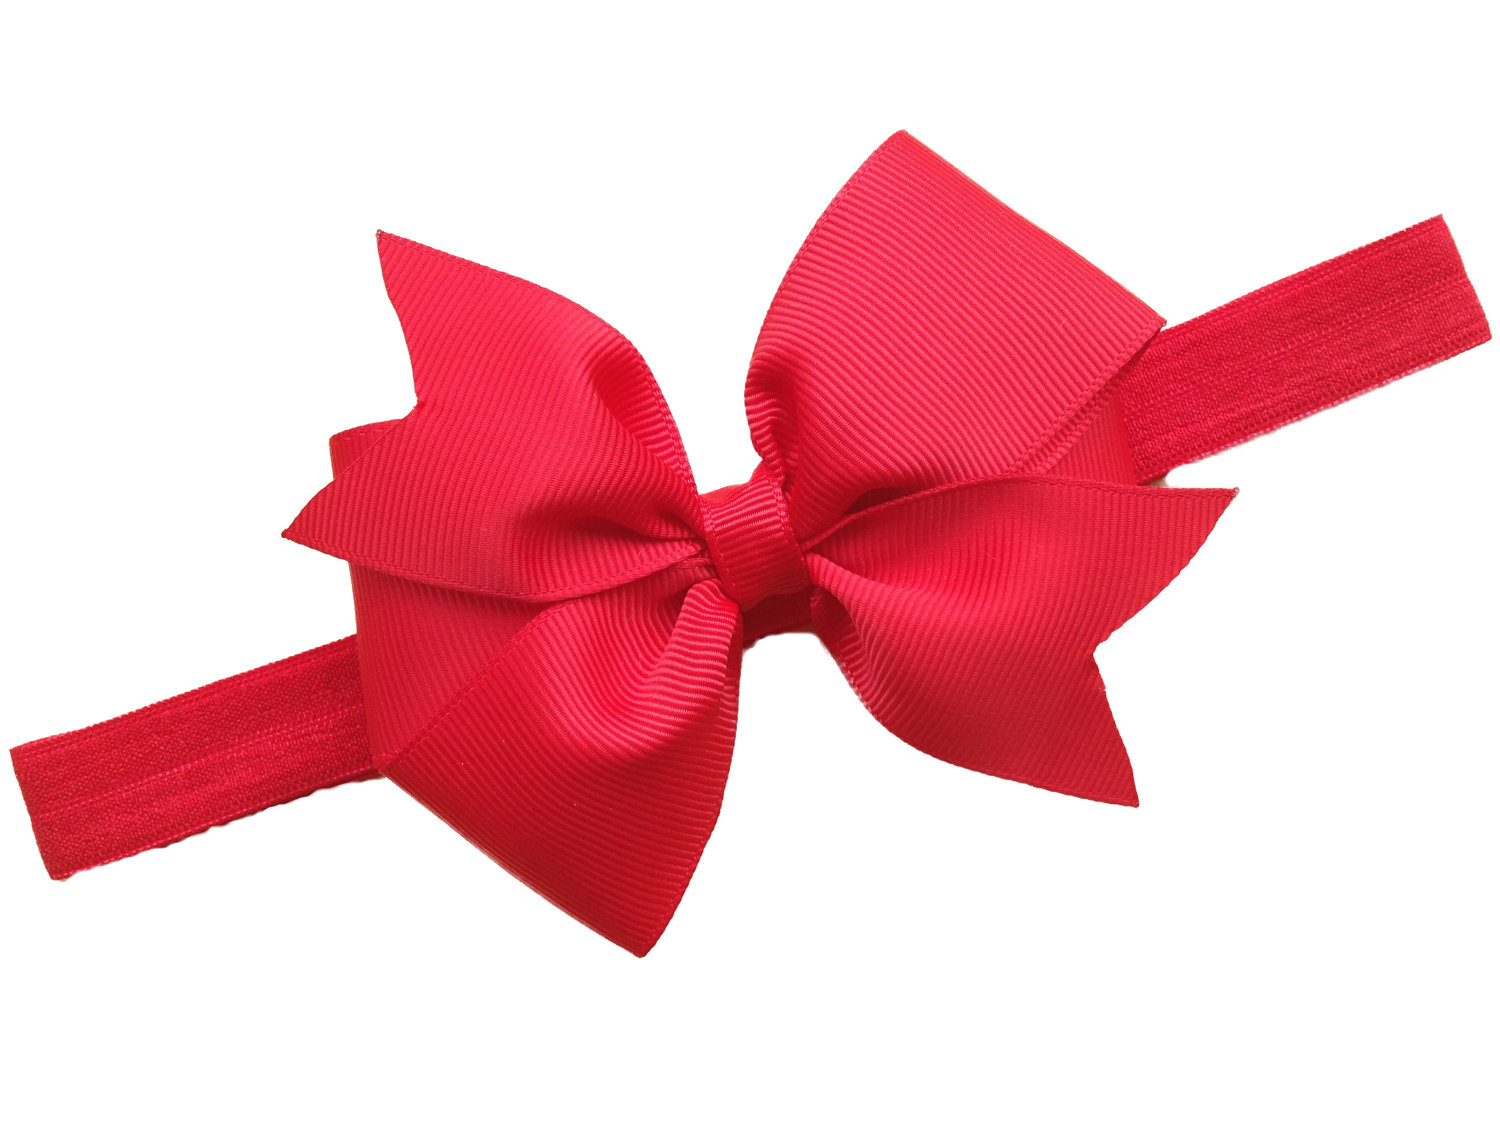 Popular items for red bows on Etsy